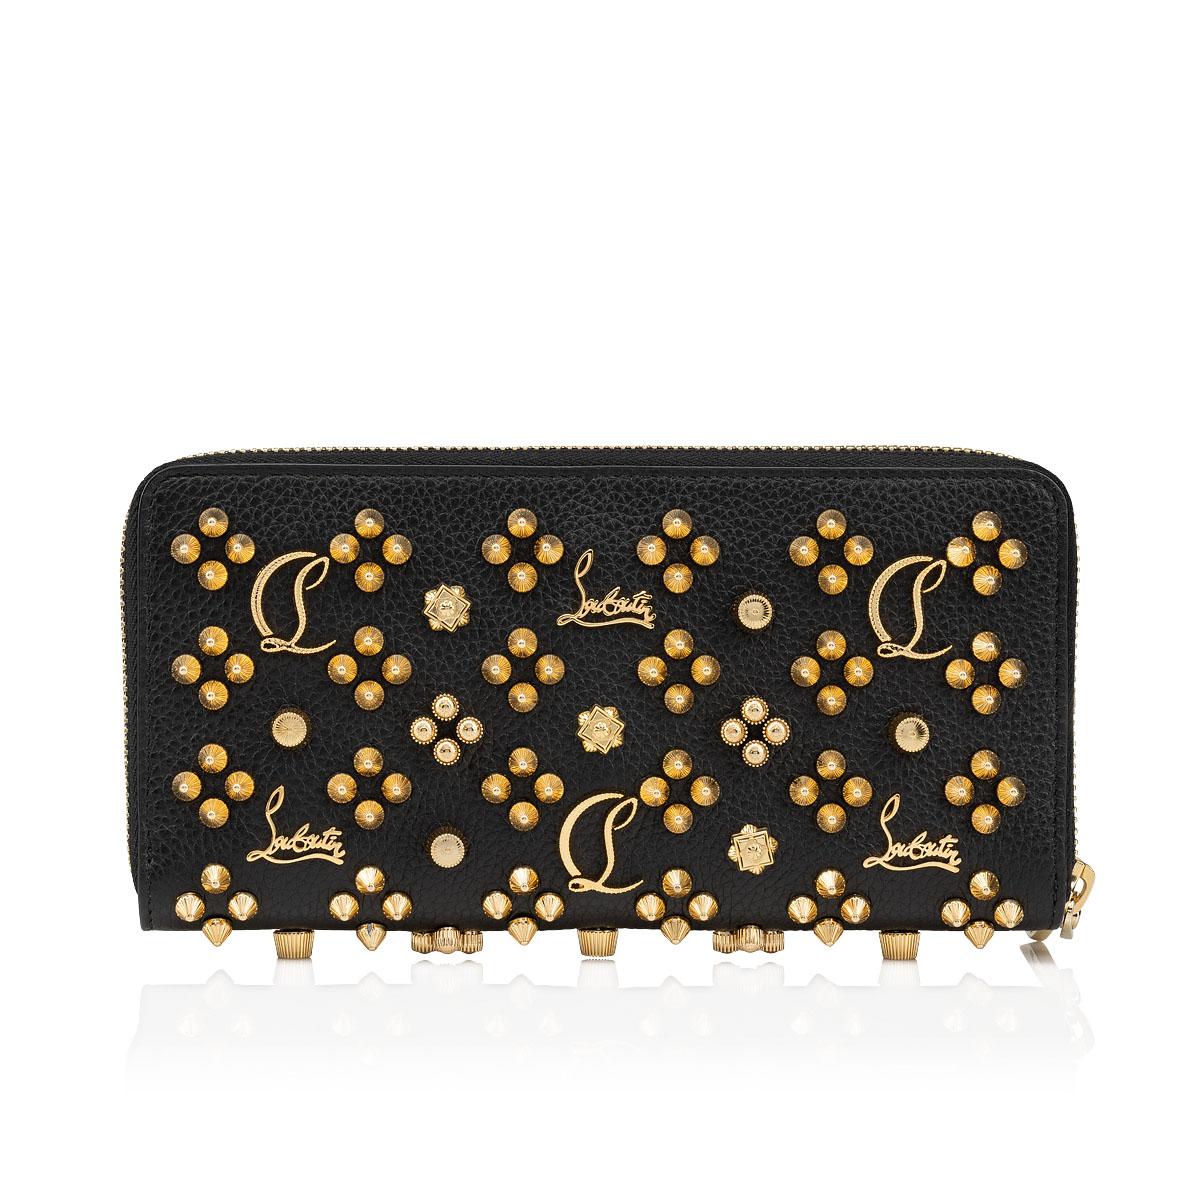 Christian Louboutin - Panettone Black Leather Spiked Wallet